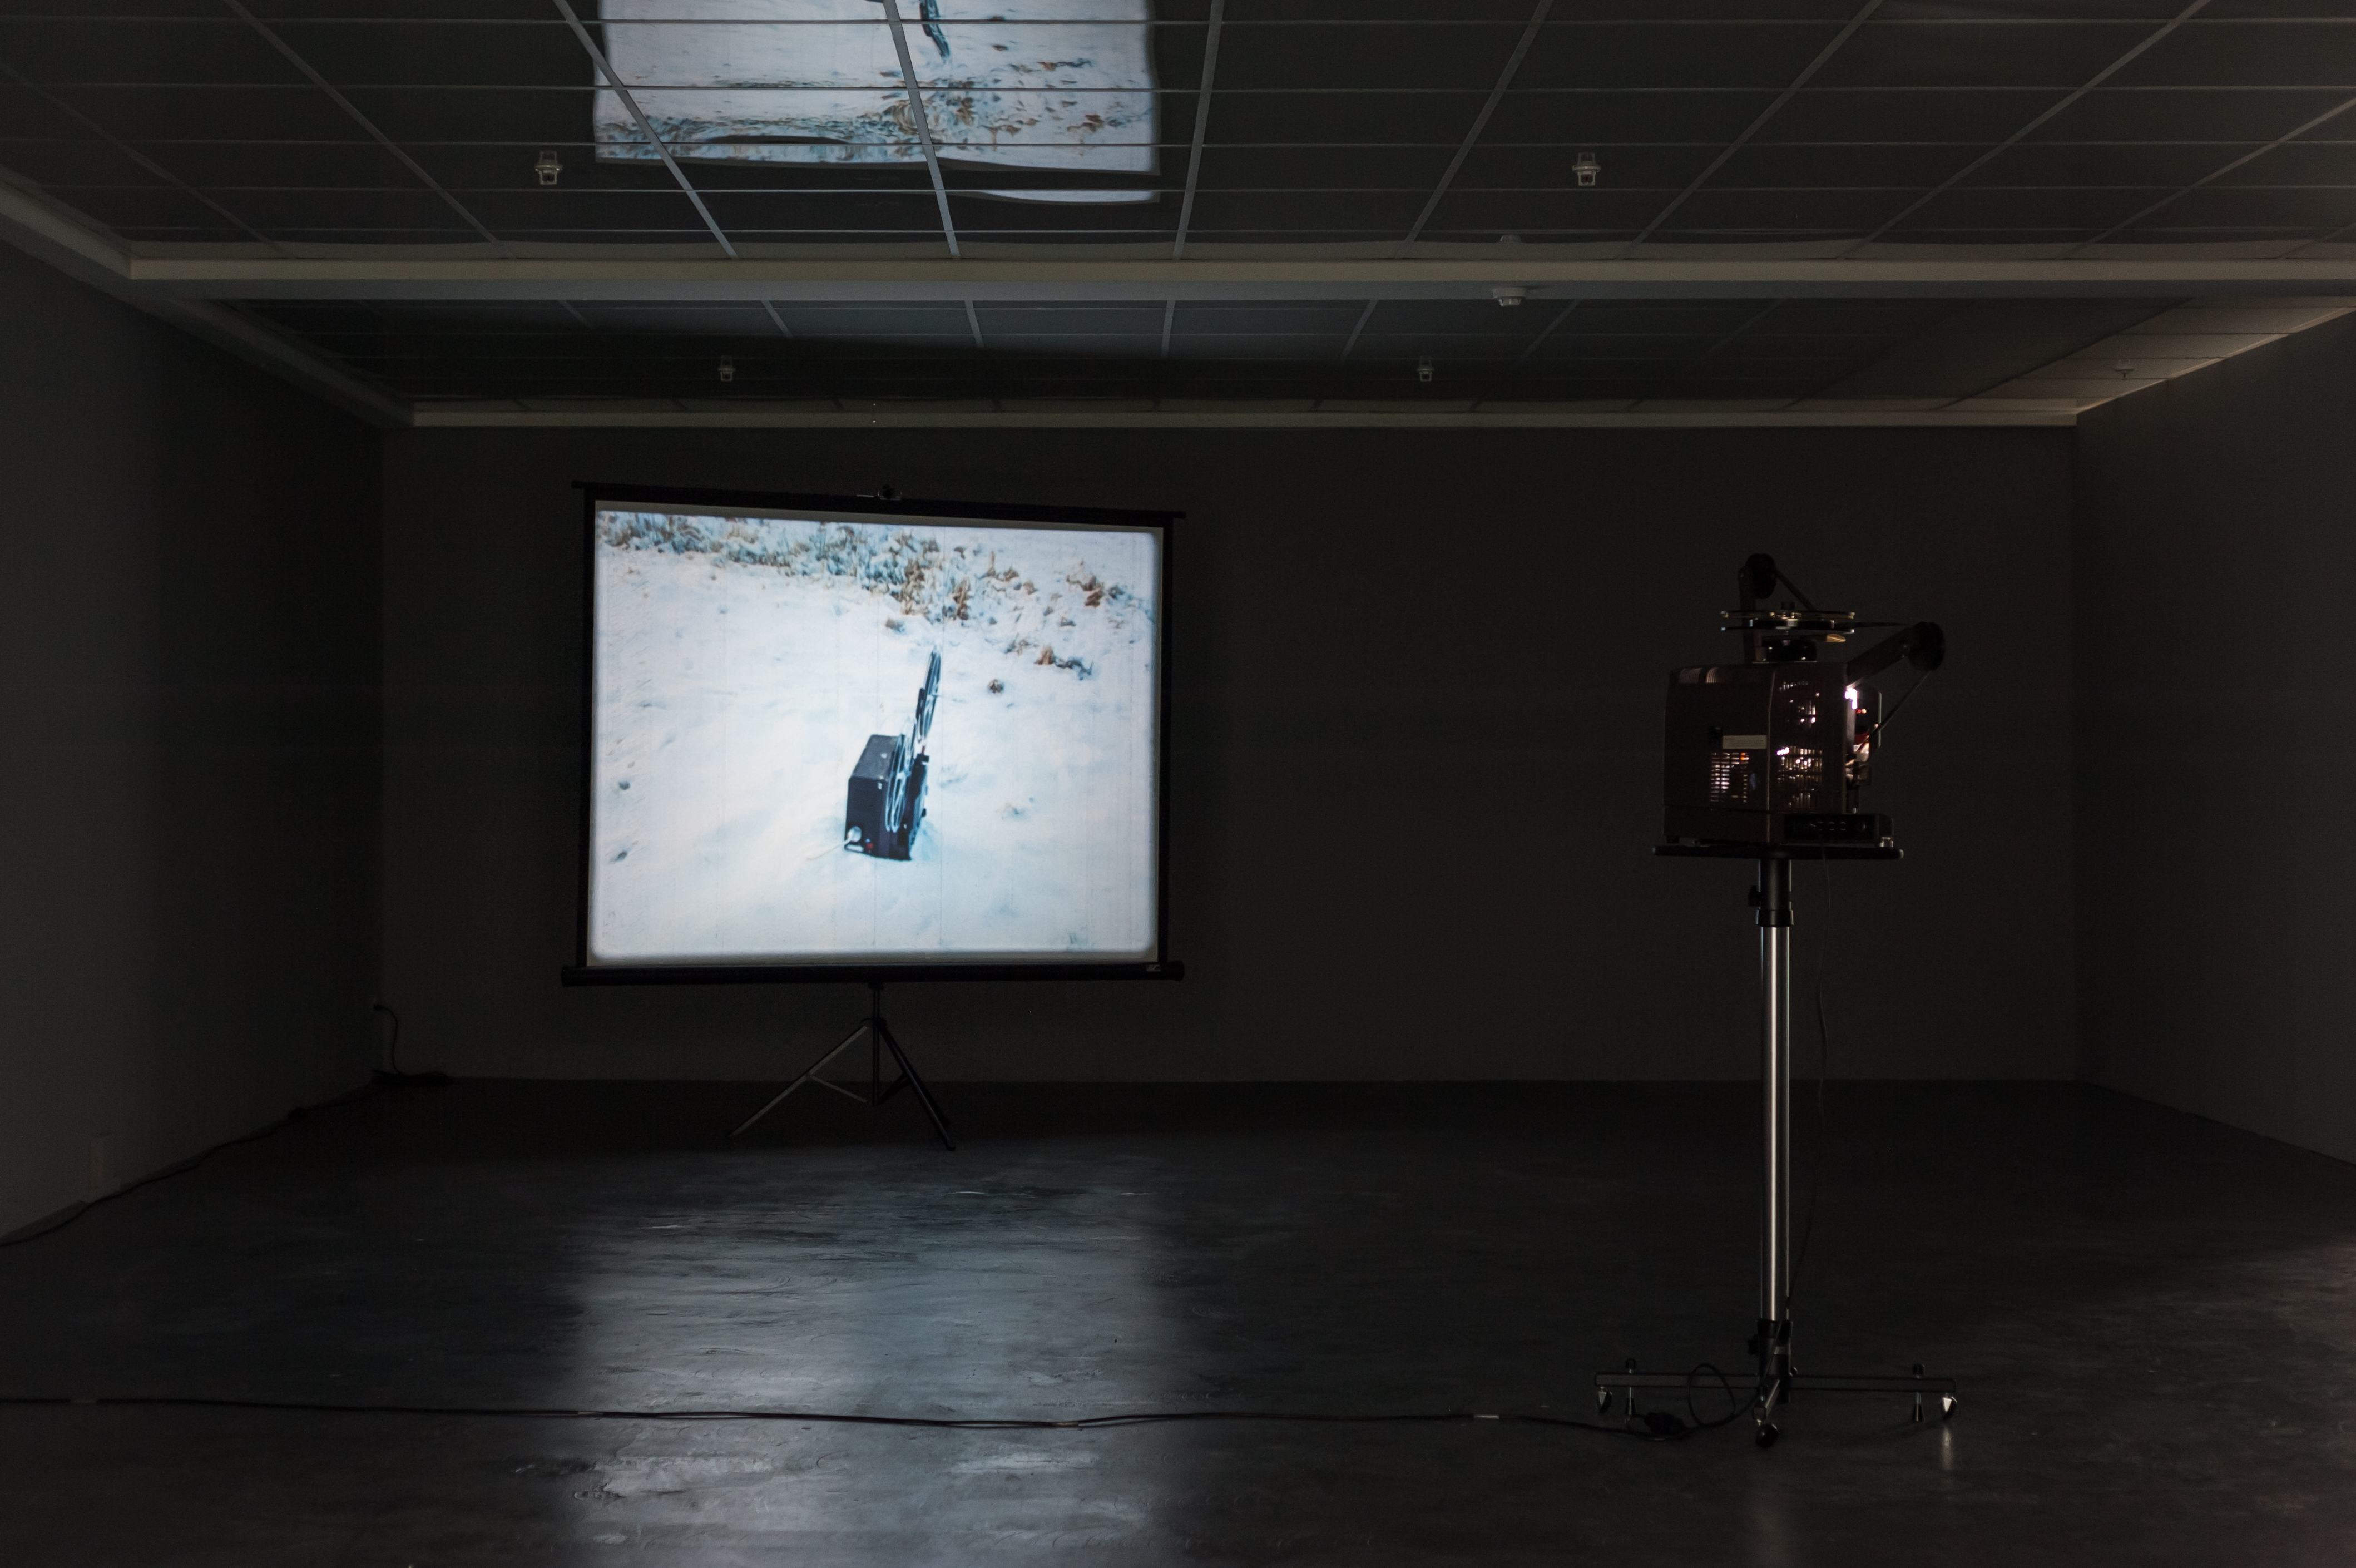 Exhibition view at Kunsthaus Baselland, photo: Emile Ouroumow, 2015